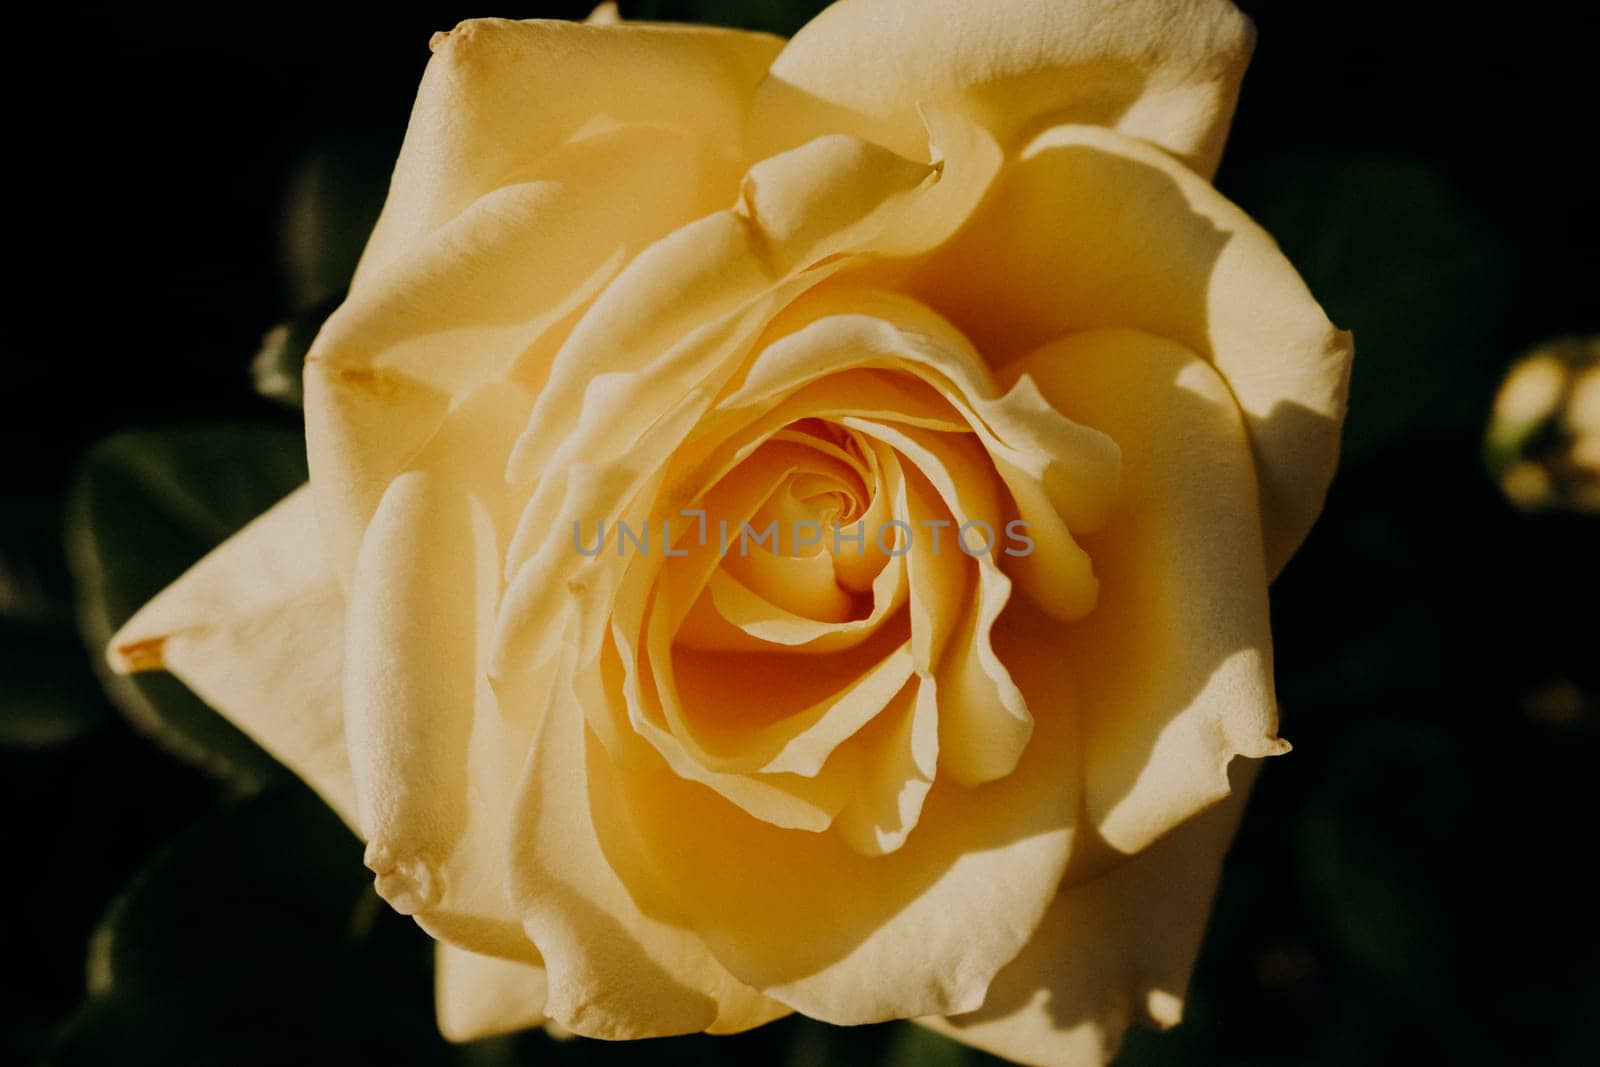 Rose flowering, opening petals on big bud. Spring, summer floral - flower blossom on black backdrop. Nature top view. Wedding, Valentine's Day concept. High quality photo